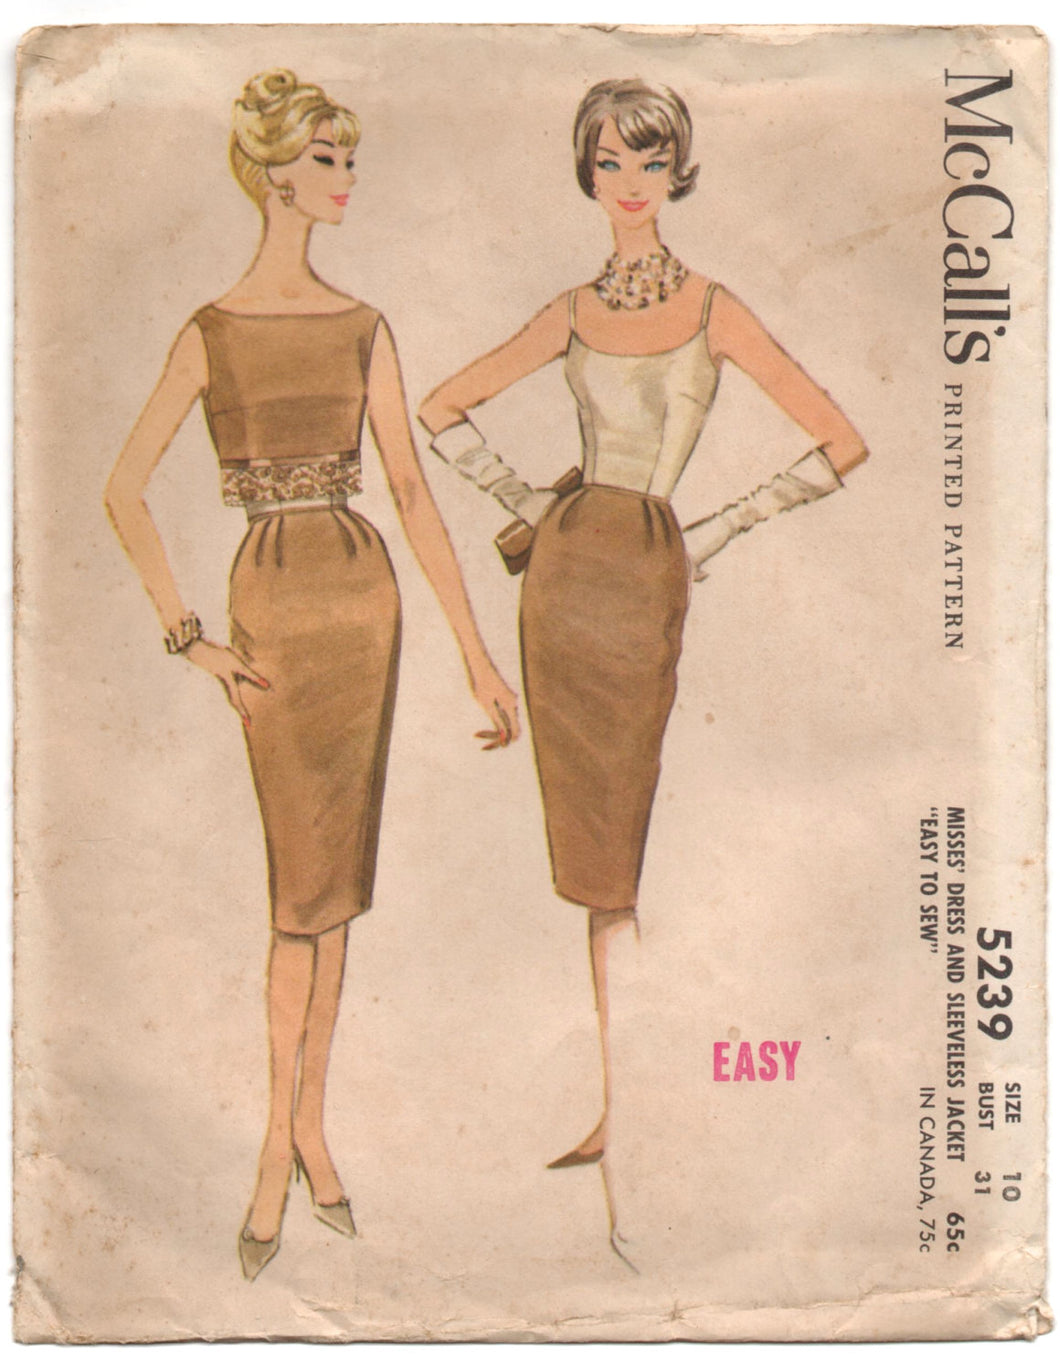 1950's McCall's Cocktail Dress with Sleeveless Jacket pattern - Bust 31